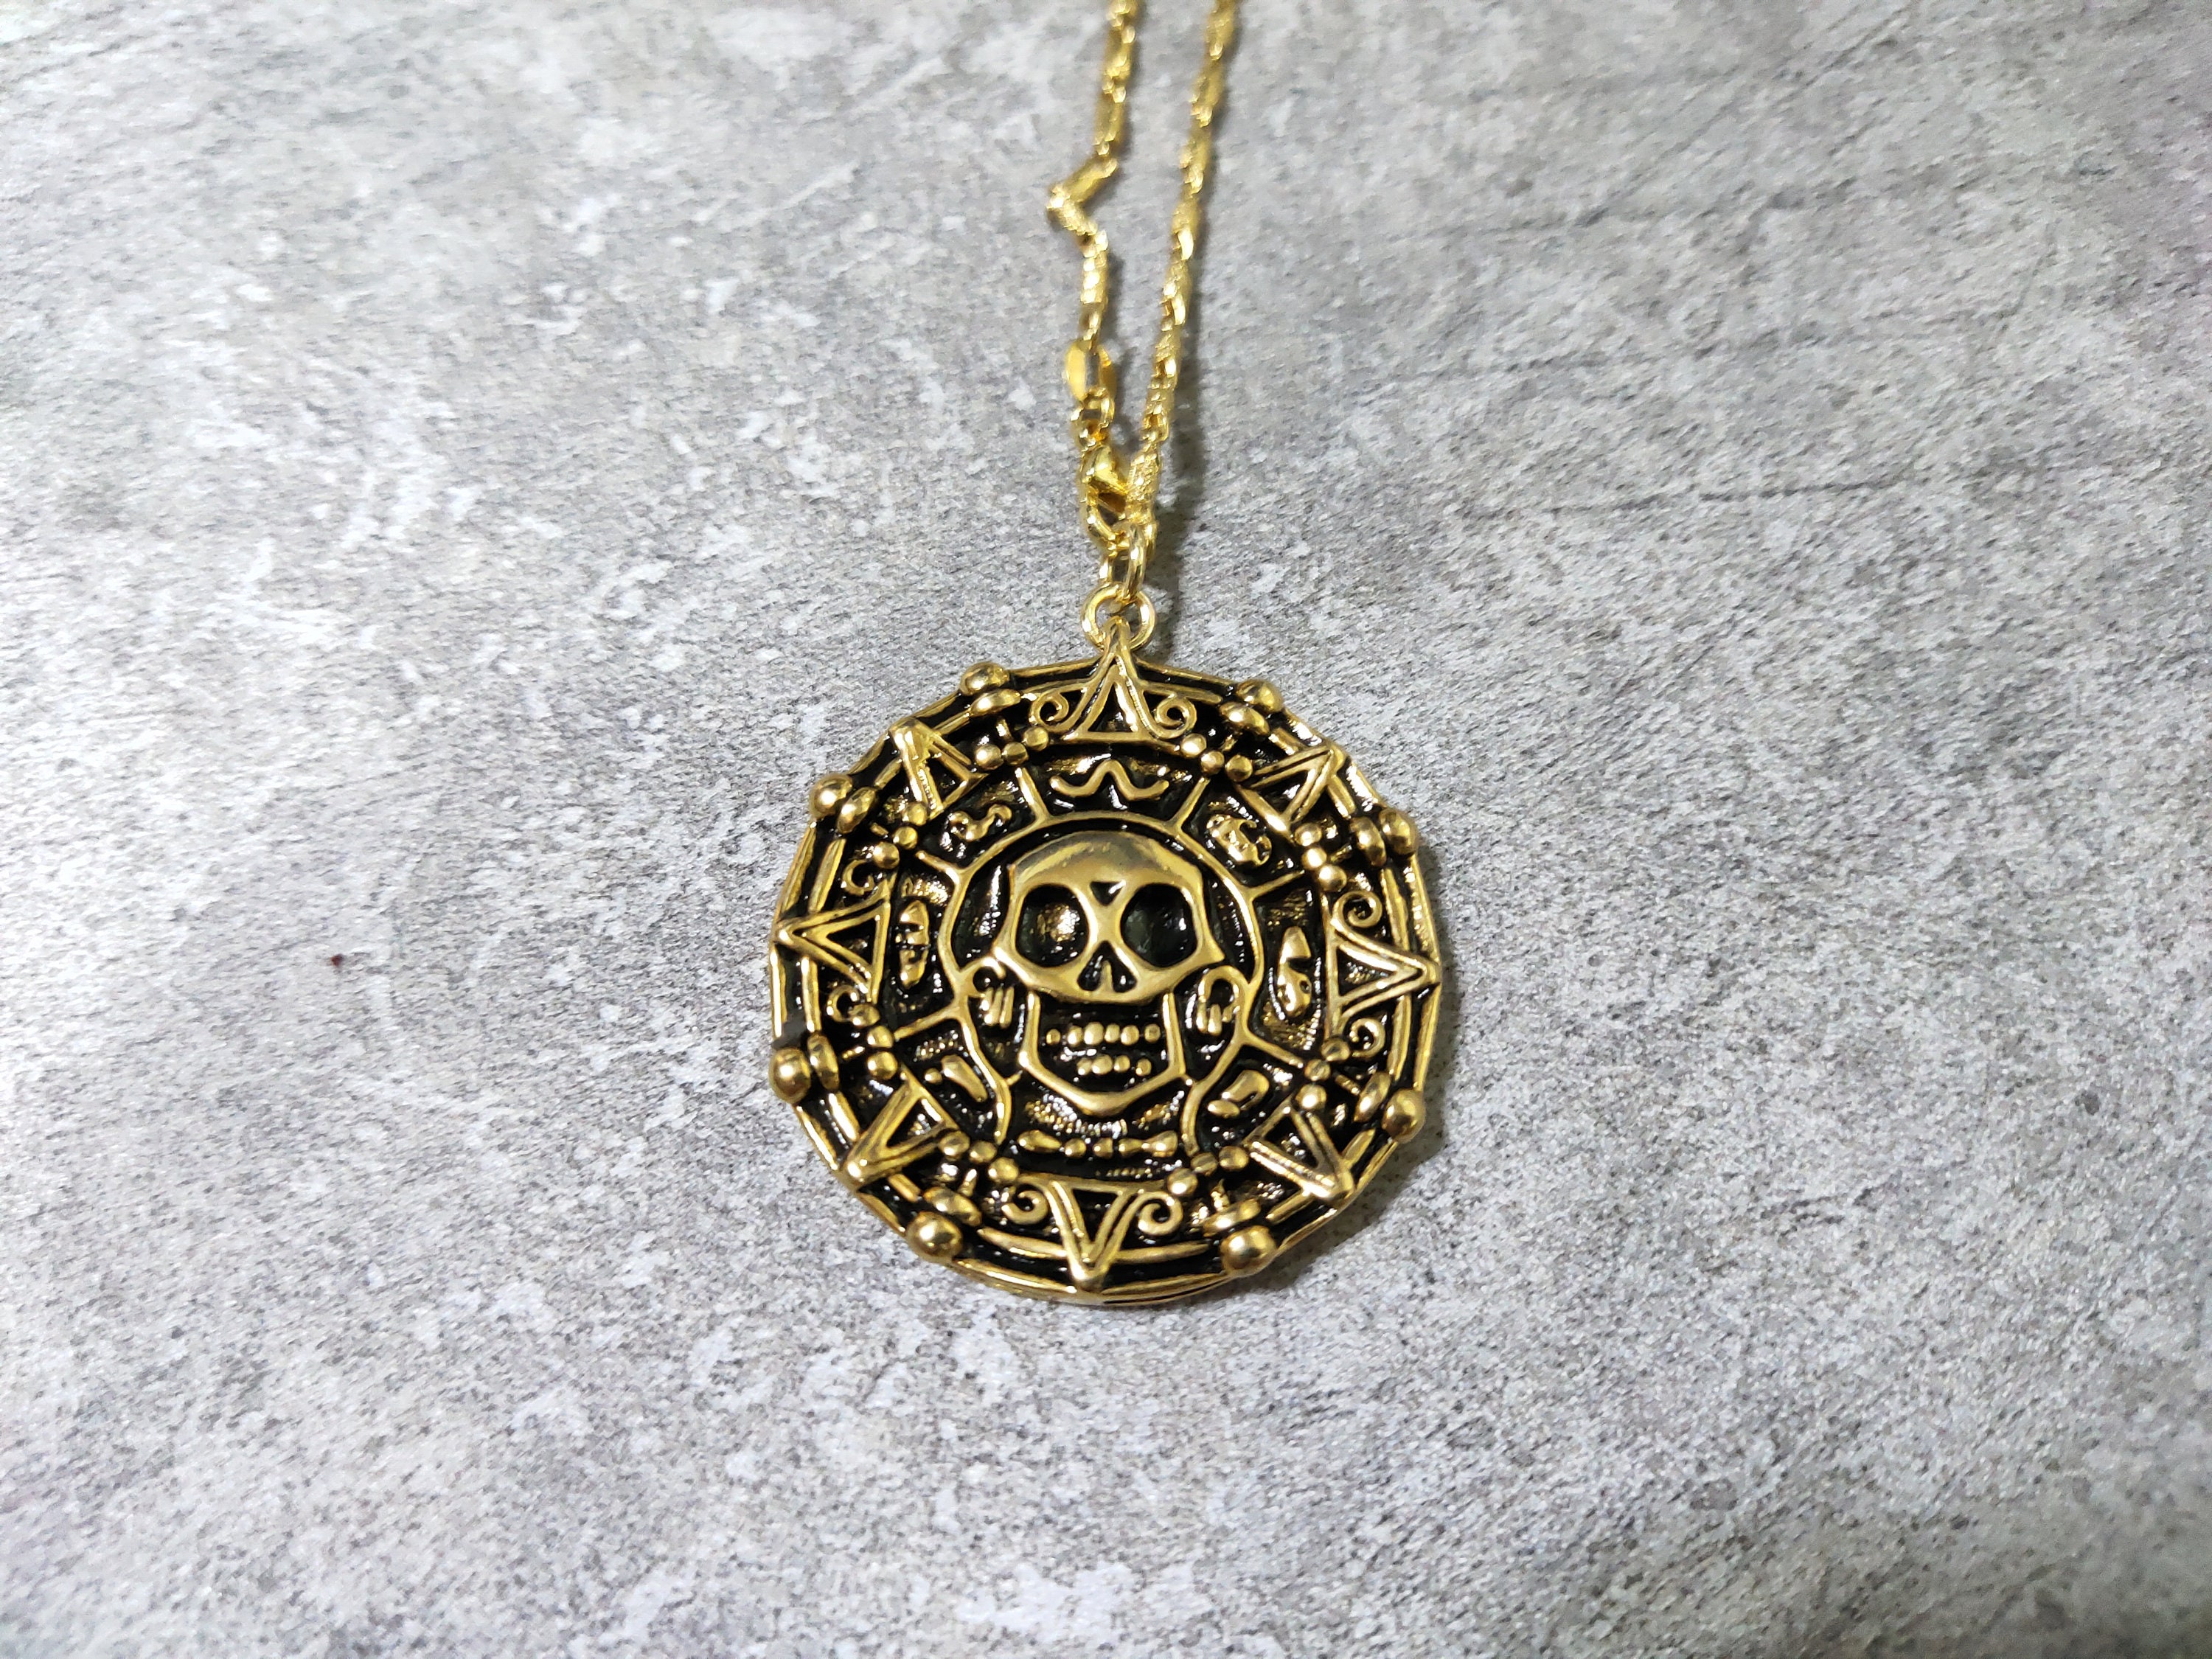 Movie Pirates of the Caribbean Aztec Gold Medallion Pendant Necklace Coin  Skull | eBay